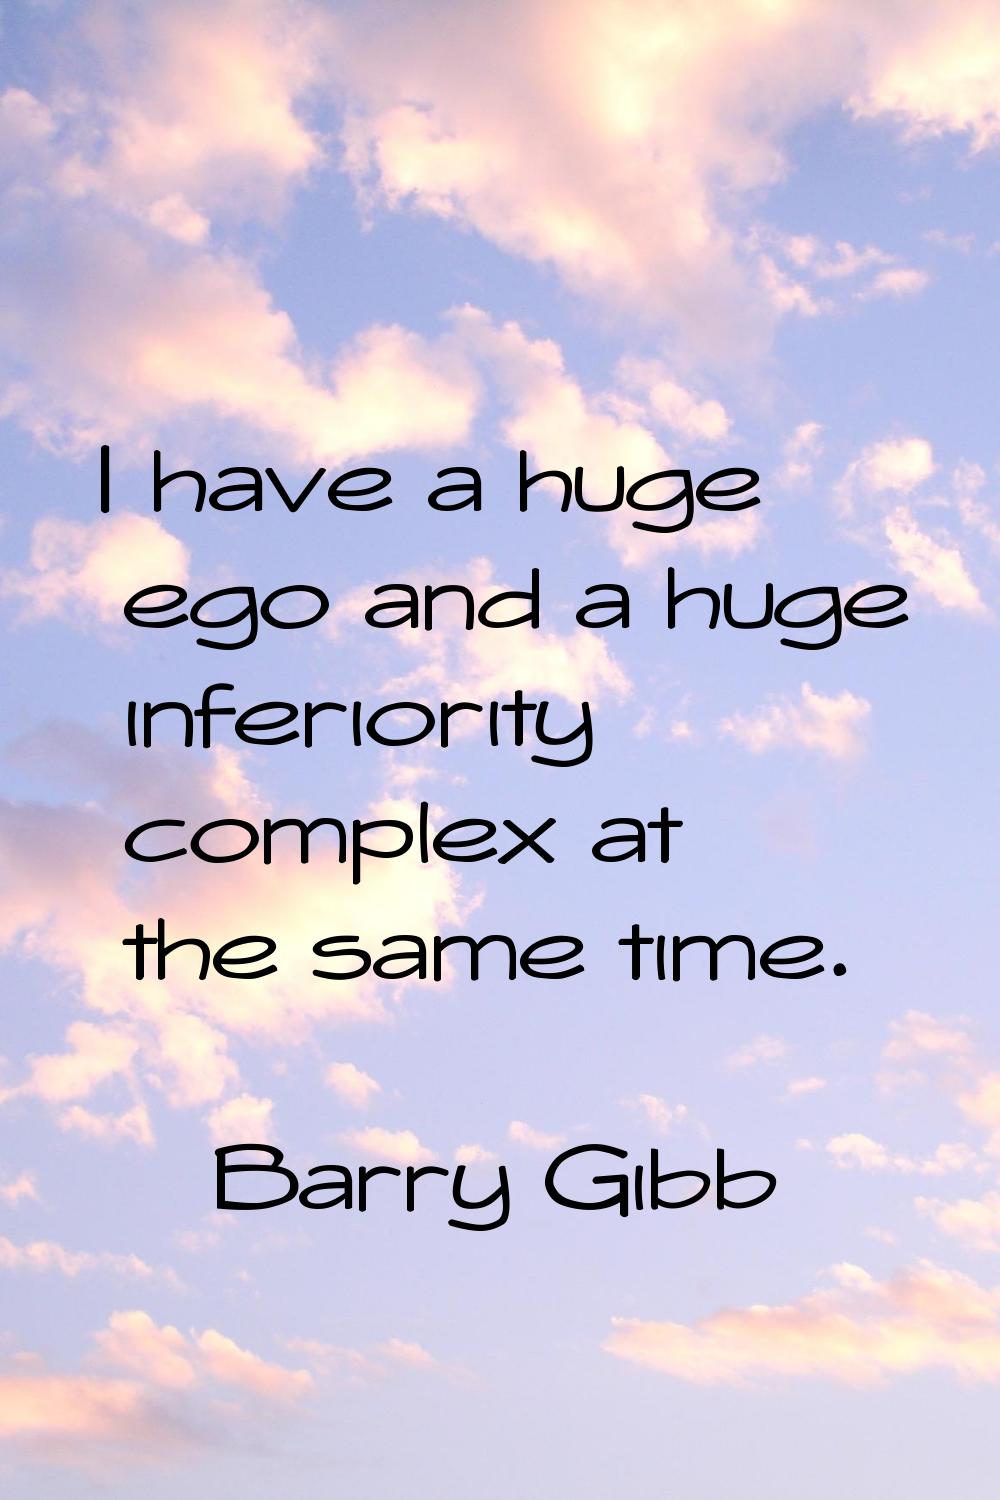 I have a huge ego and a huge inferiority complex at the same time.